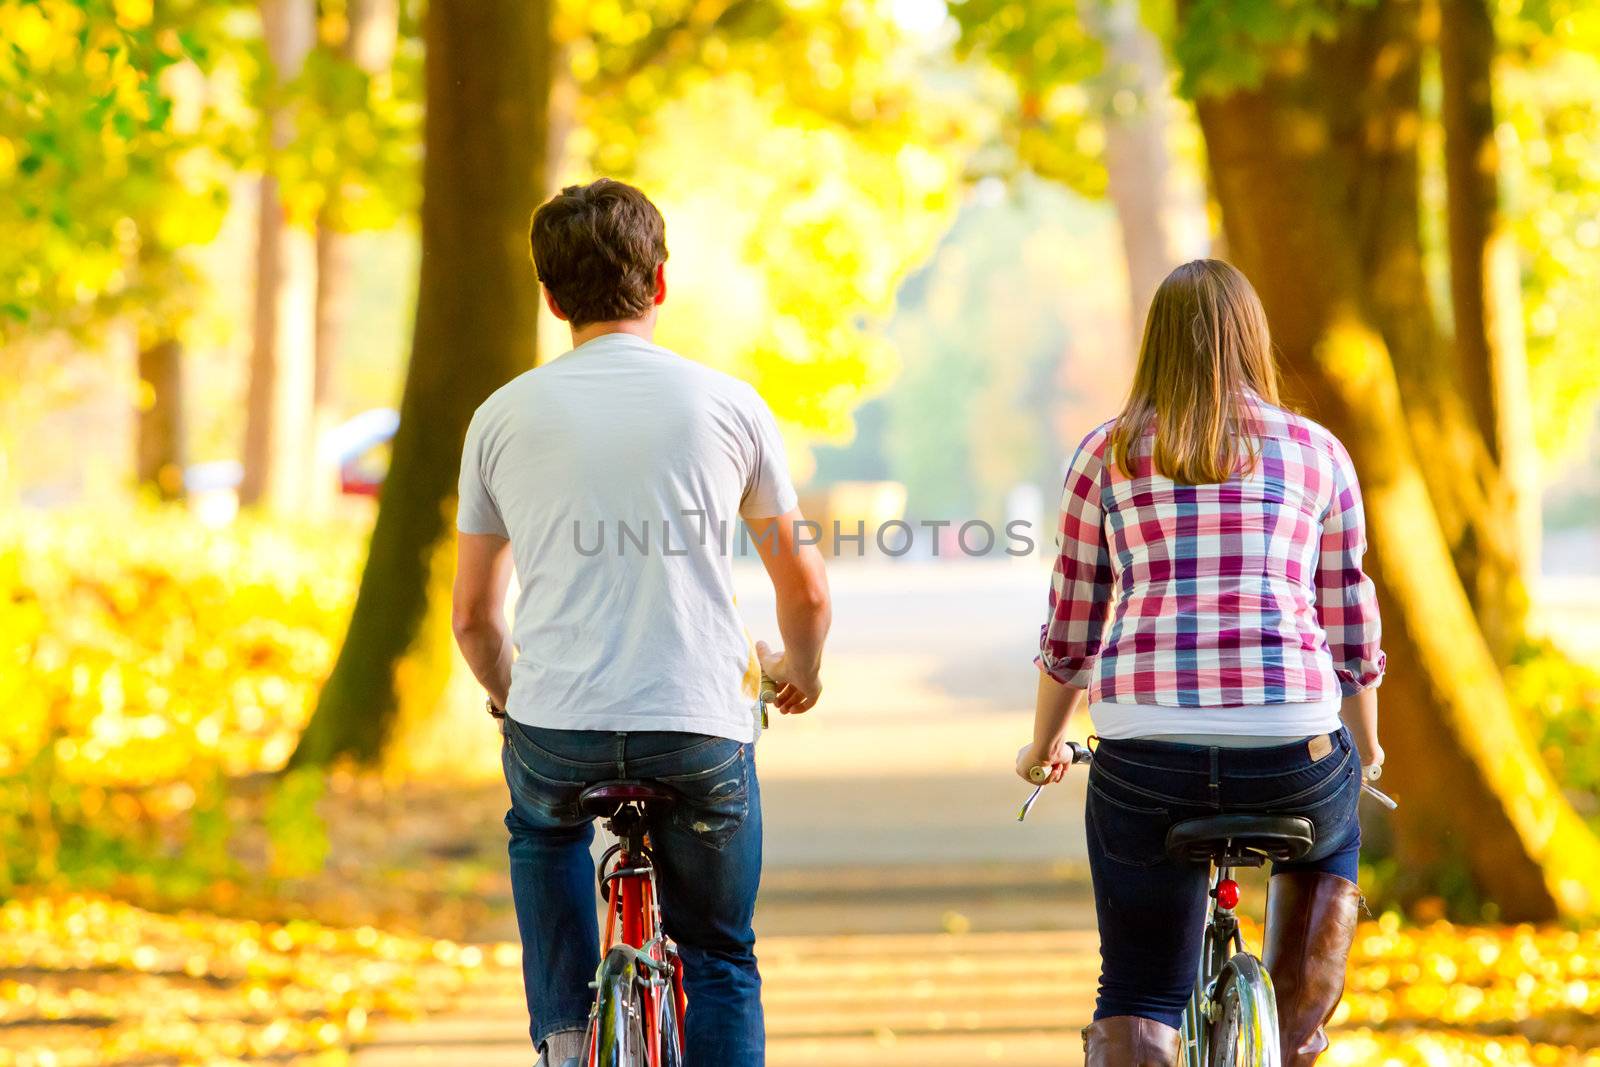 Cycling Together by joshuaraineyphotography